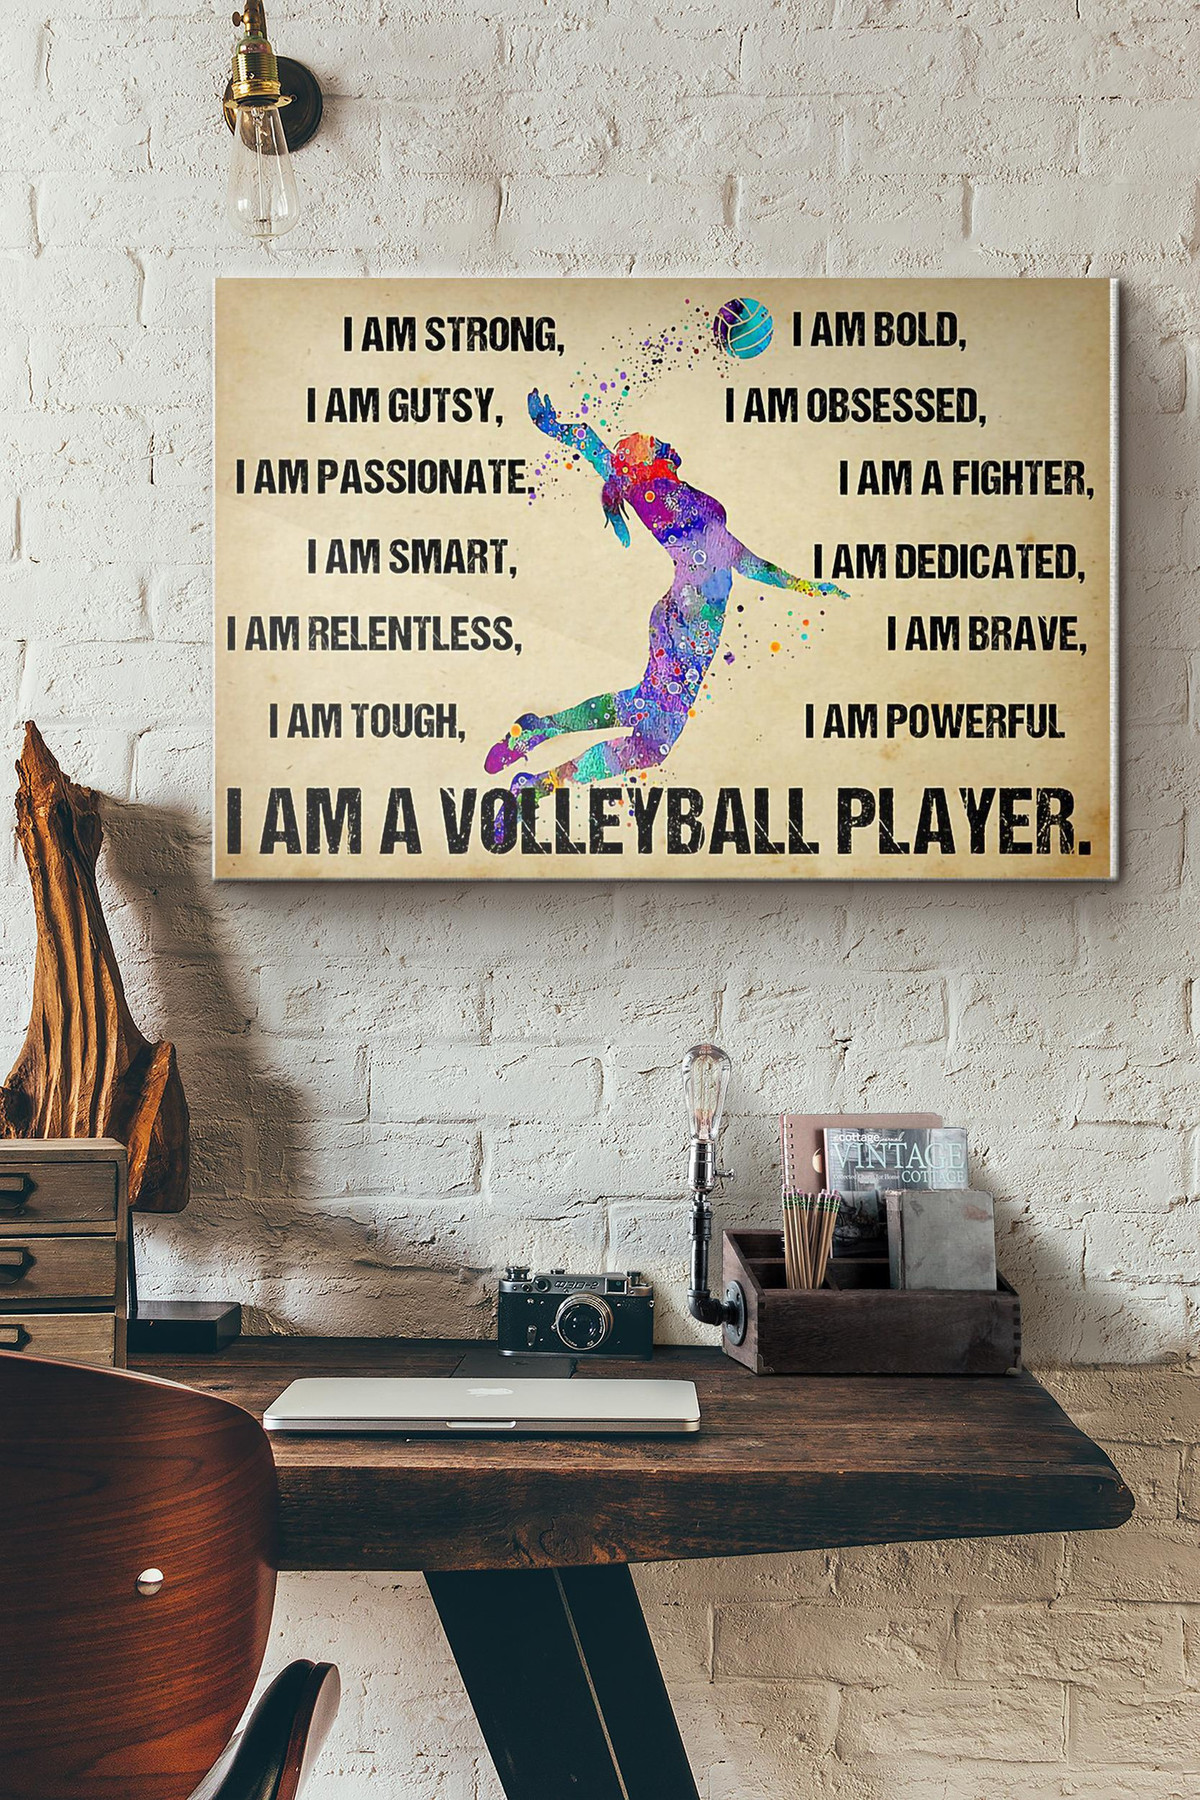 I Am A Volleyball Player Canvas Painting Ideas, Canvas Hanging Prints, Gift Idea Framed Prints, Canvas Paintings Wrapped Canvas 8x10